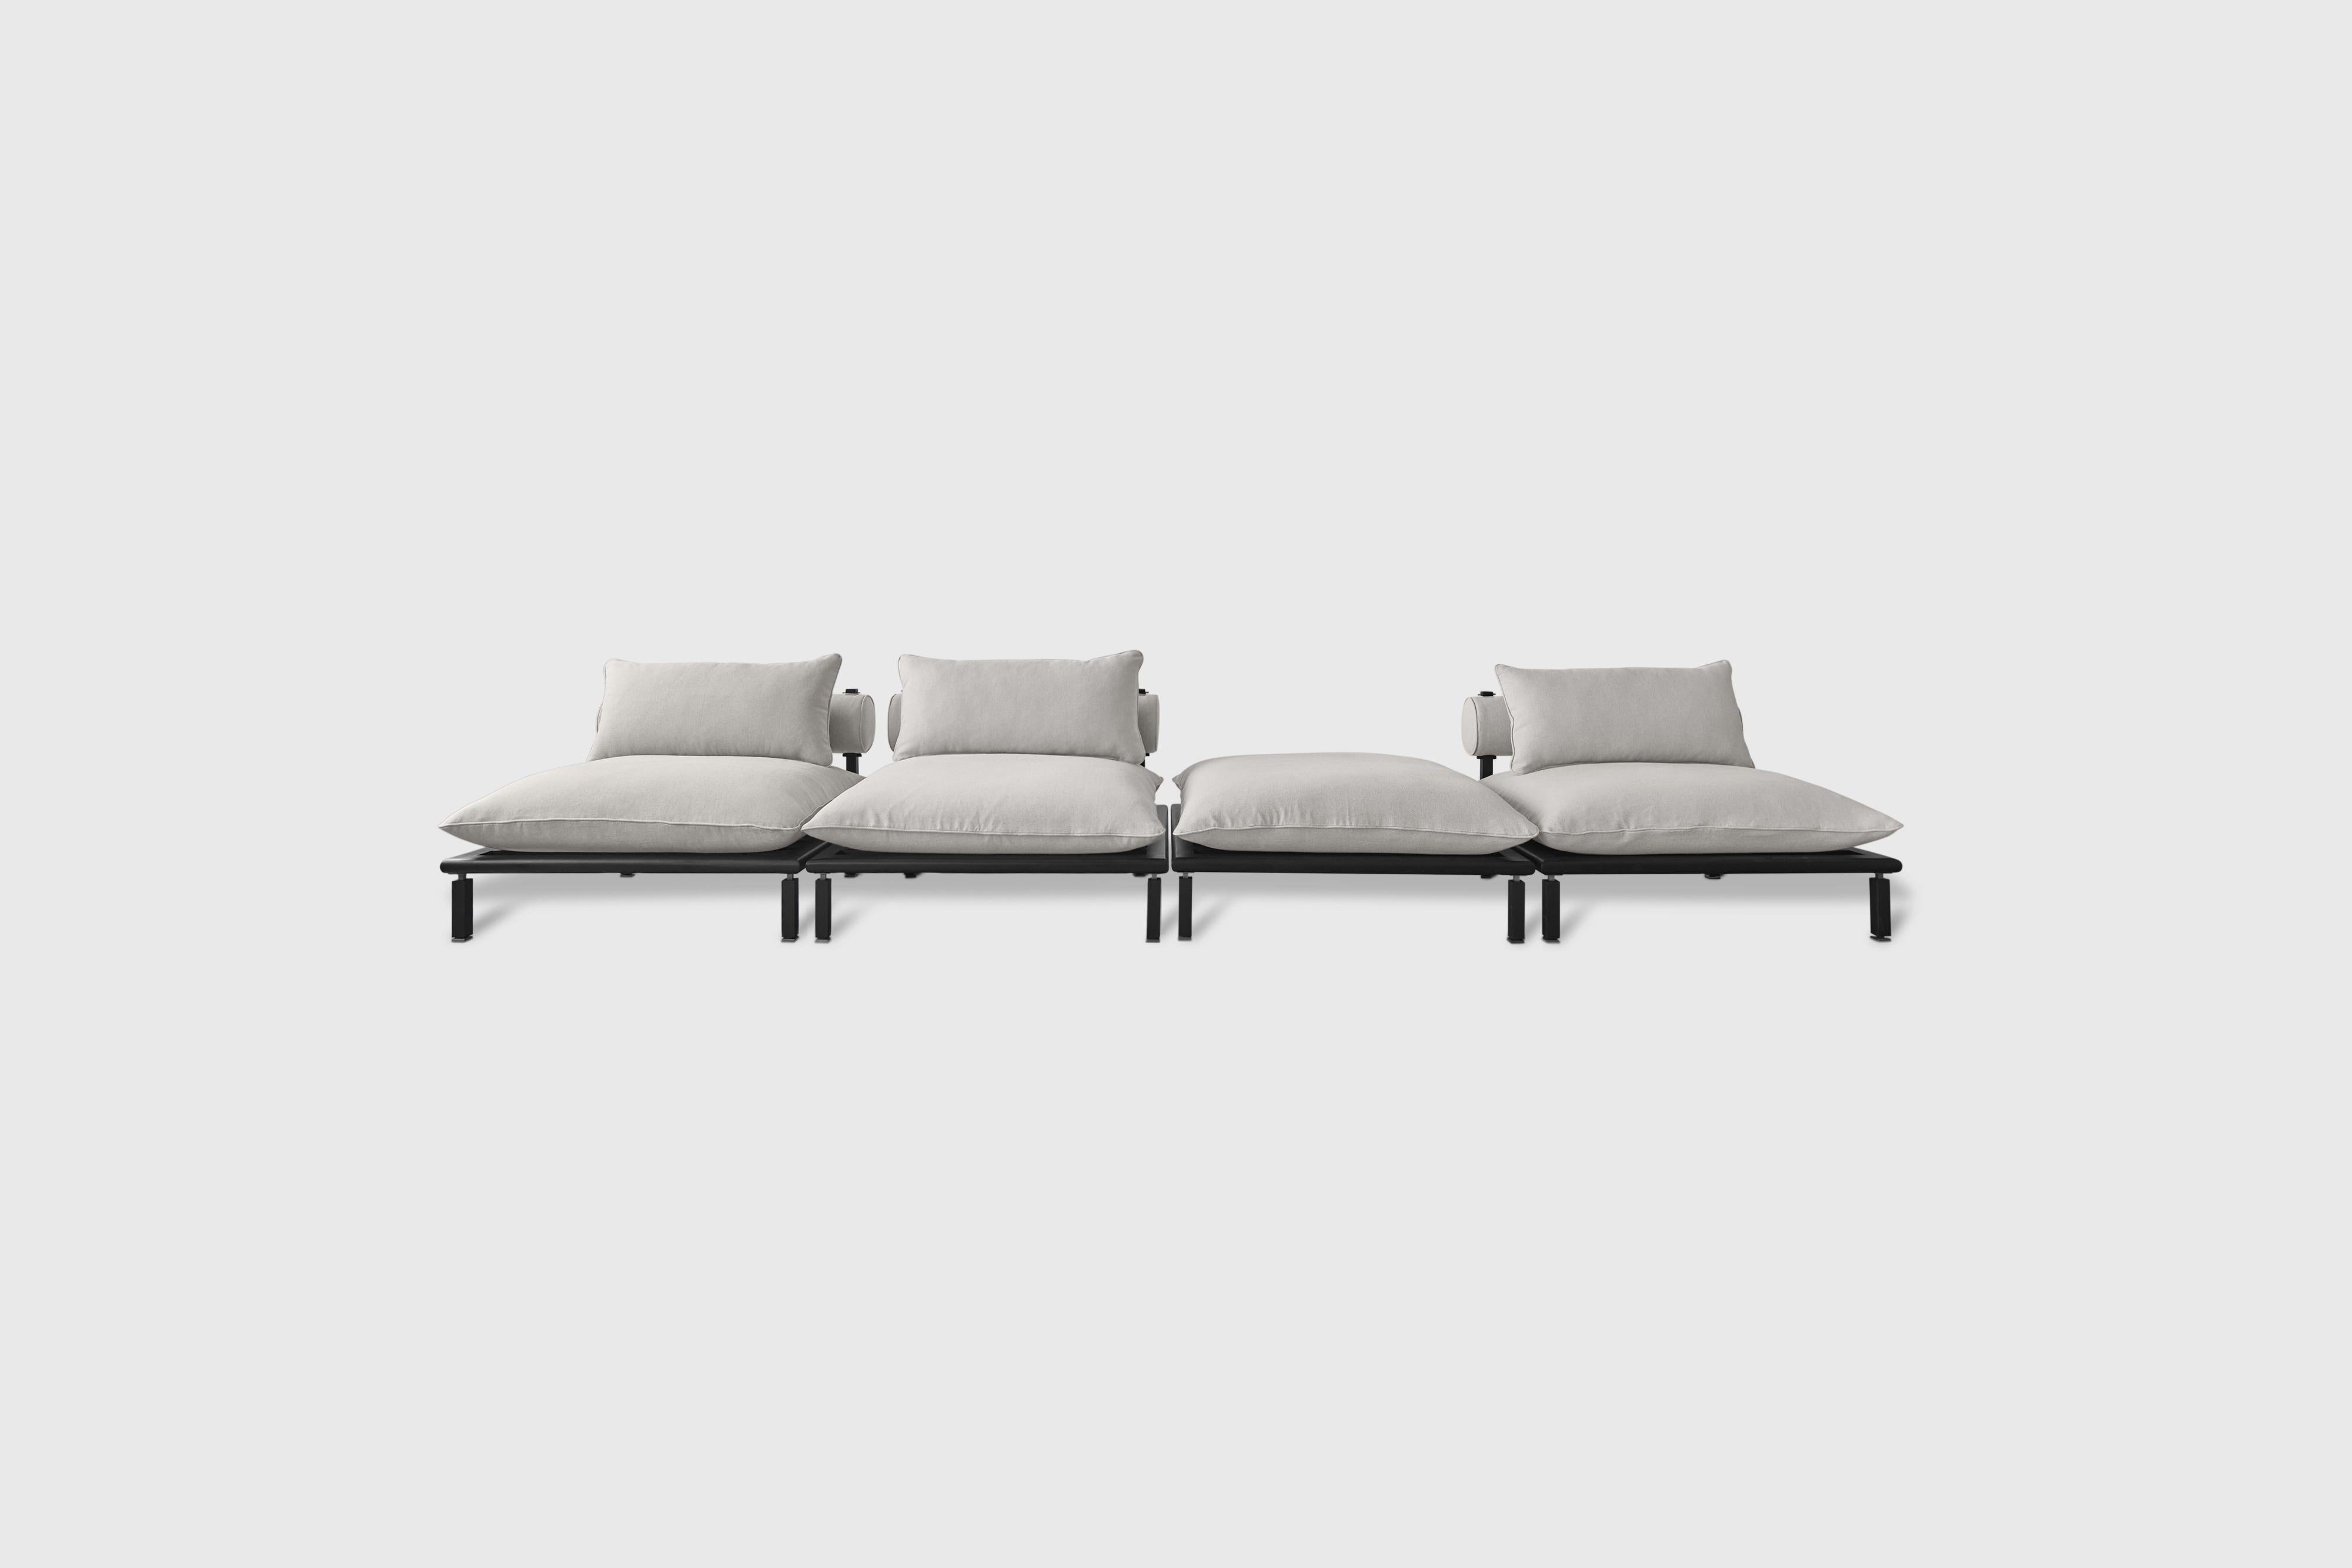 Nerthus sofa by Atra Design
Dimensions: D 434 x W 108.5 x H 71.1 cm.
Materials: fabric, teak.
Different back and chaise module conbinations available.

3 x Back module
1 x Chaise module

Atra Design
We are Atra, a furniture brand produced